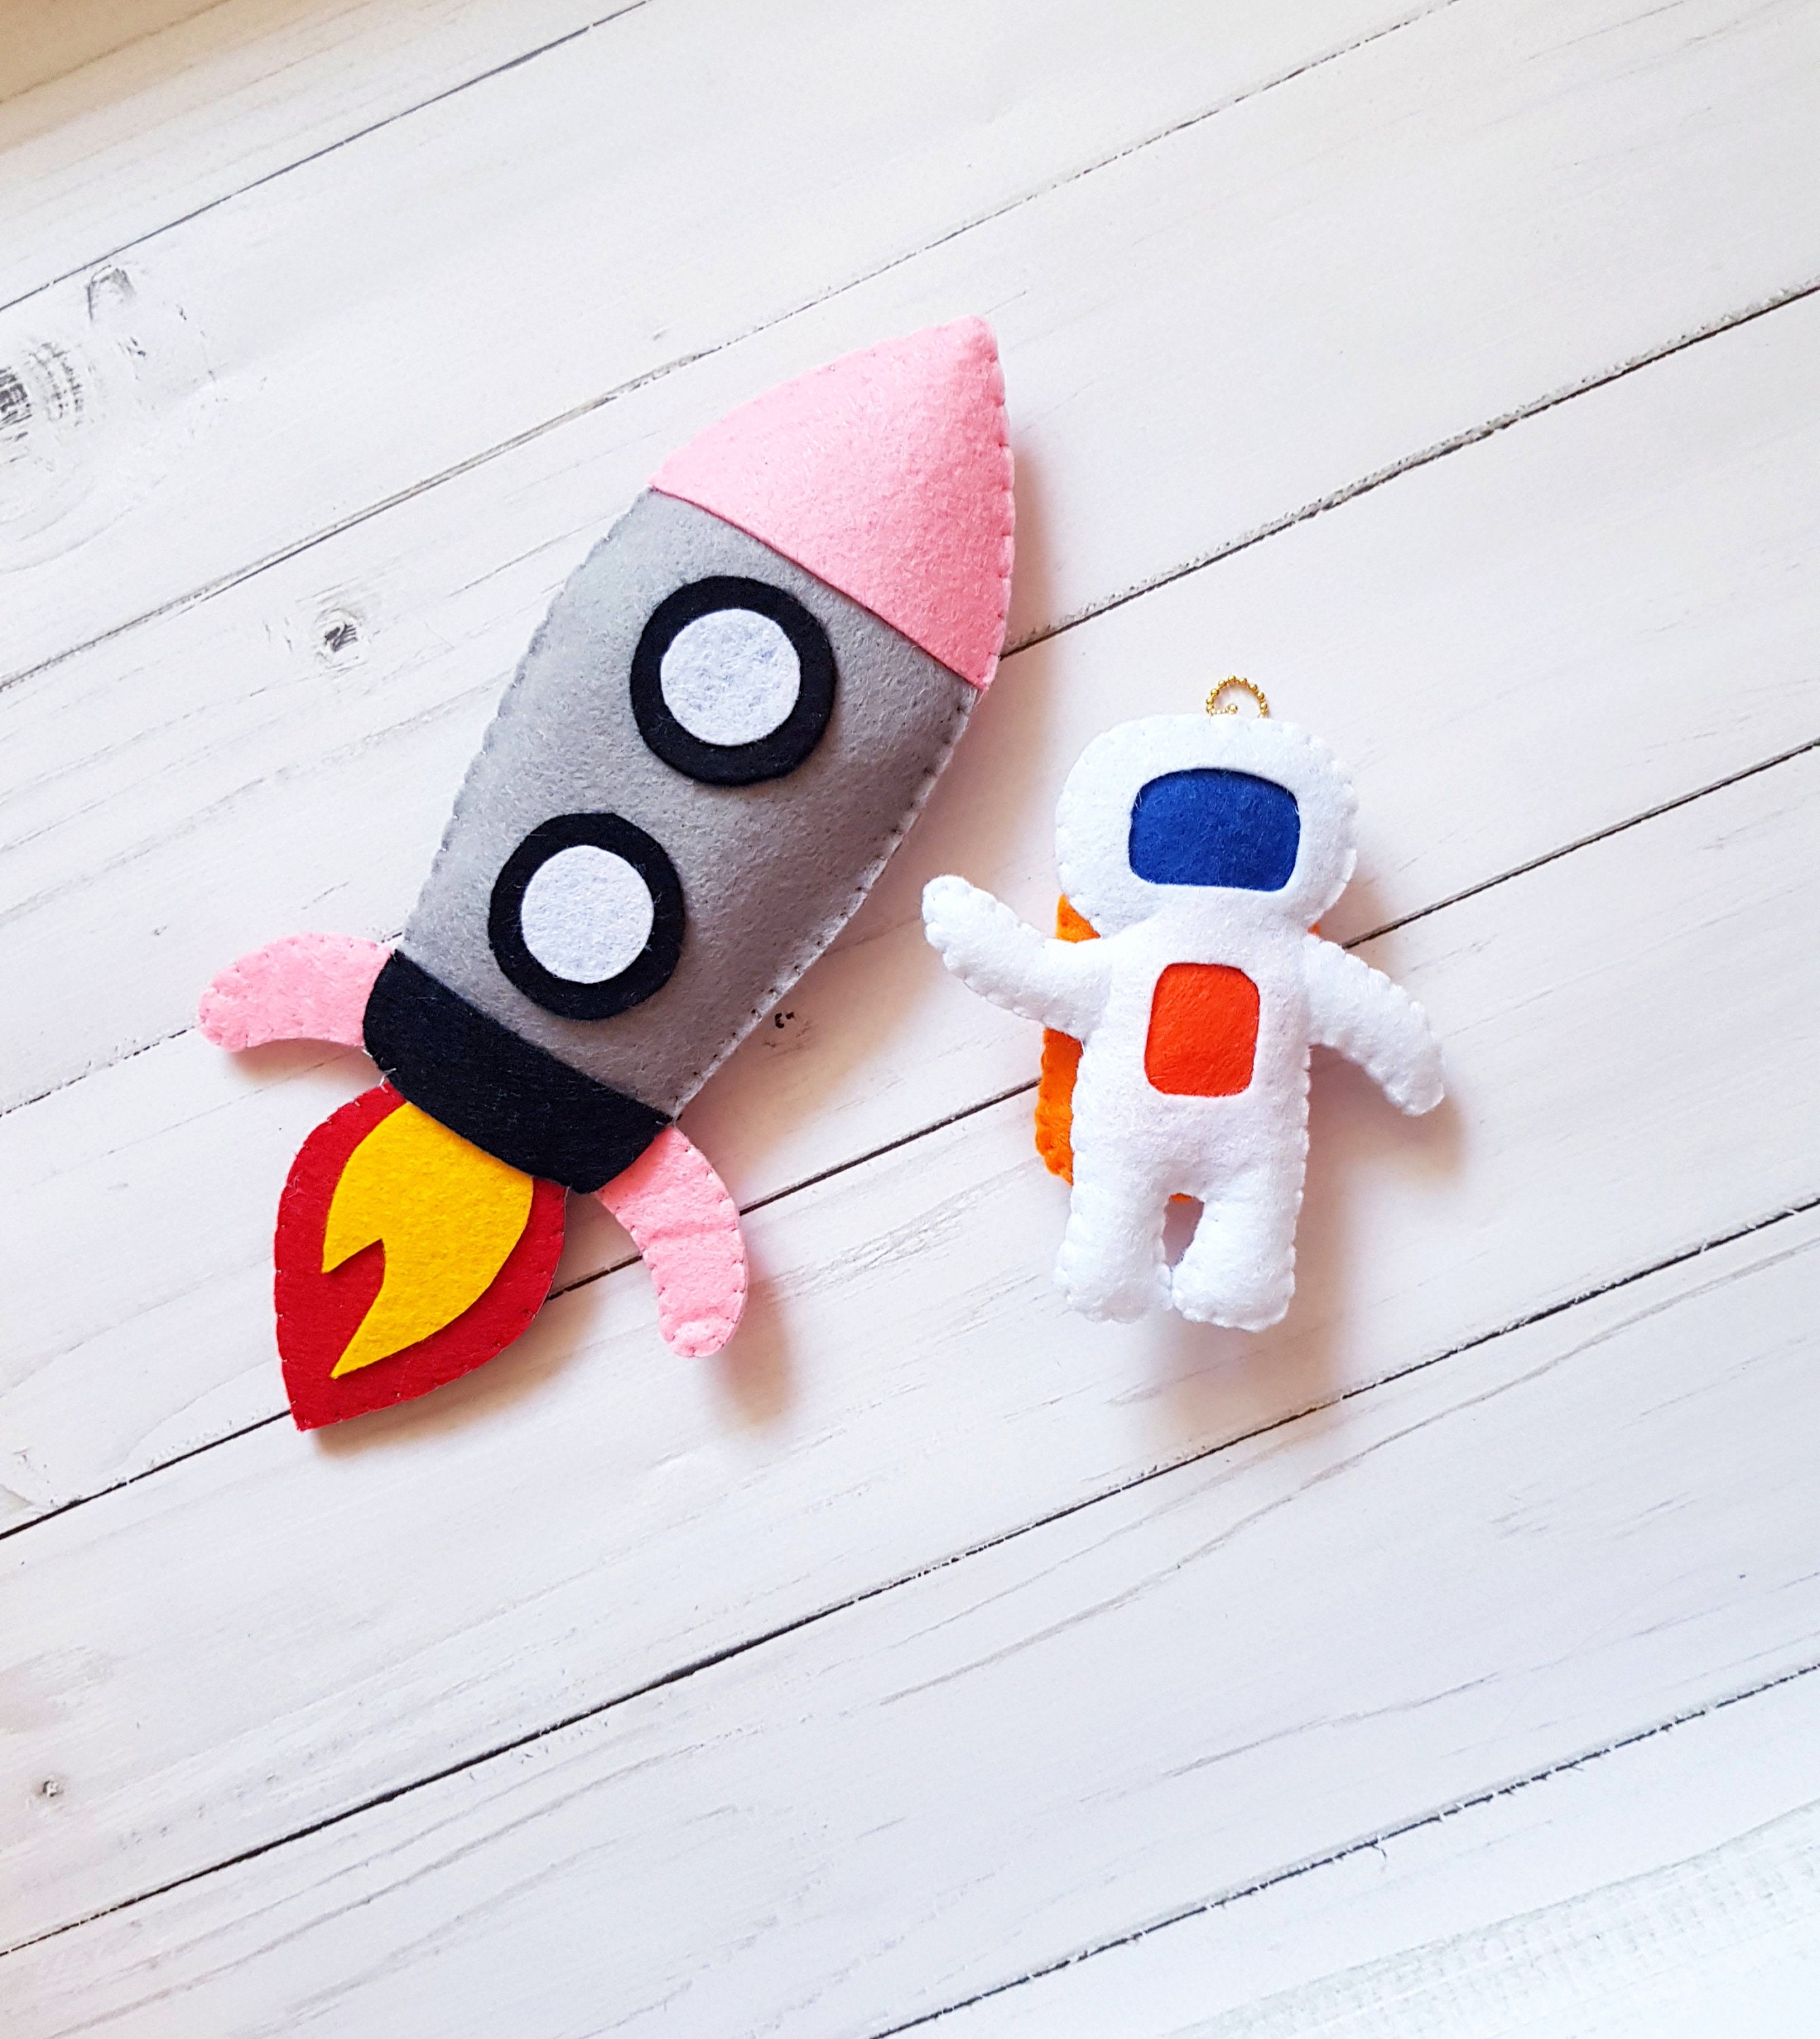  Flying Childhood Felt Craft Kits for Kids Boys Sewing 6 Purses  Include Car Rockets Aliens Robots Campervan Camera DIY Arts Crafts Supplies  Groovy Party Gifts : Toys & Games